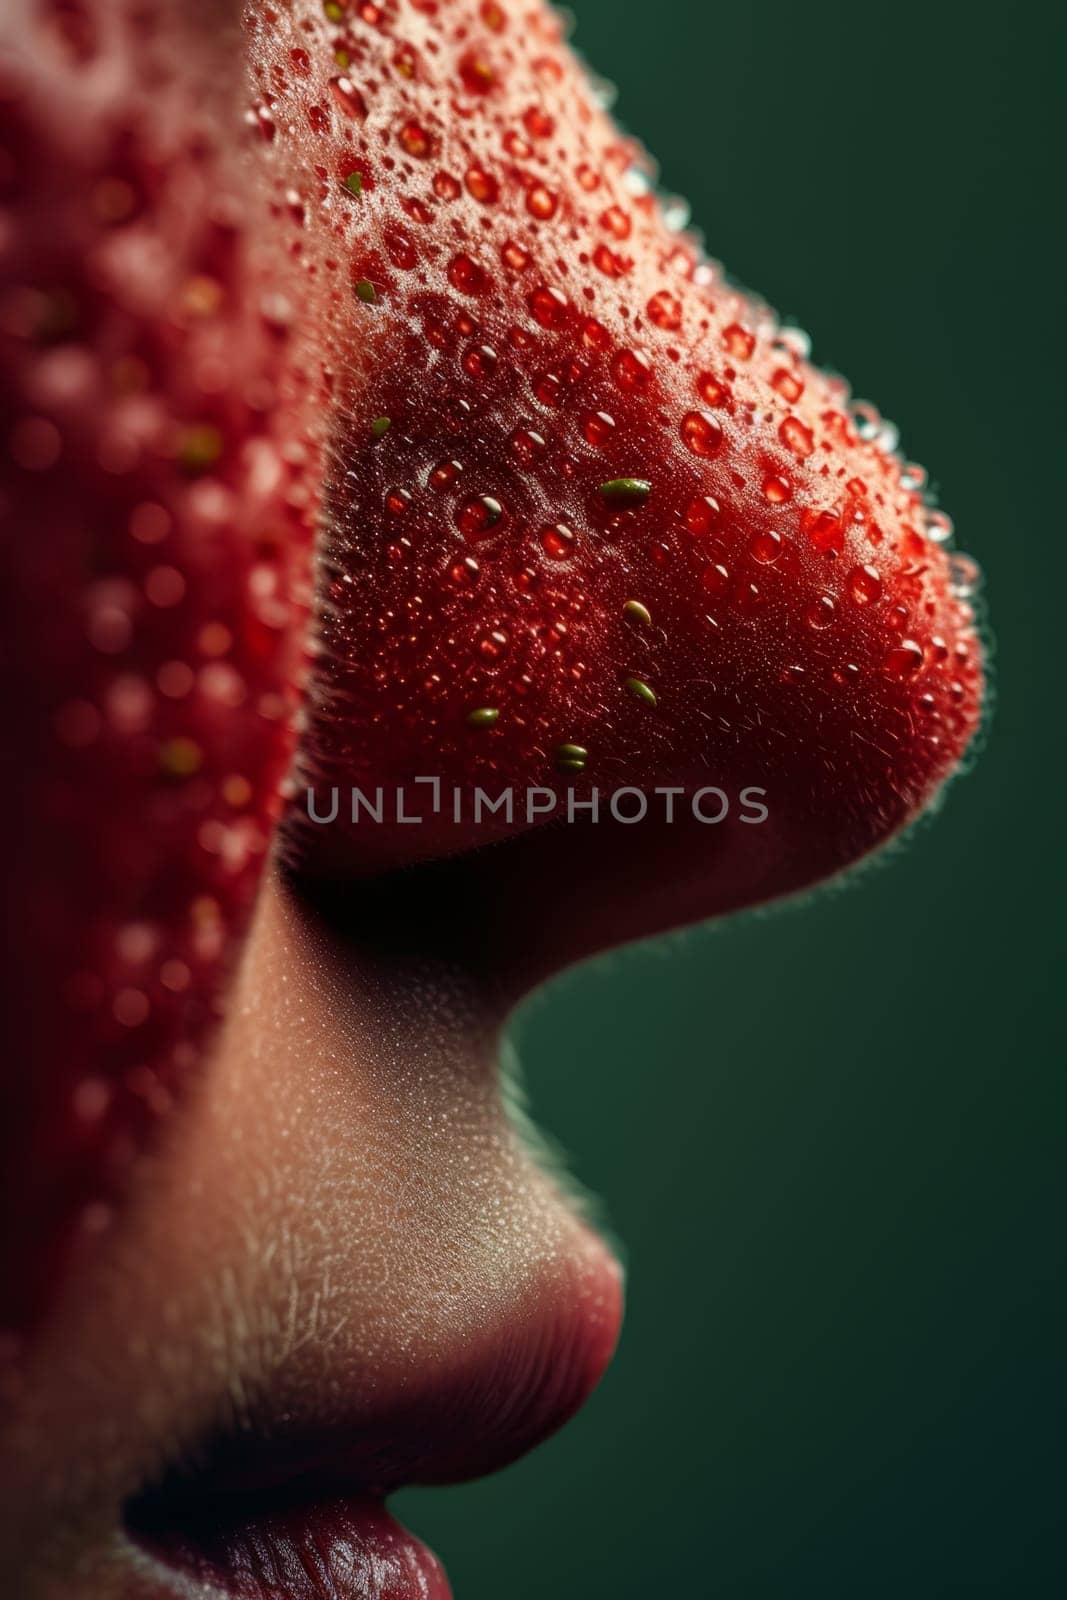 close-up of a nose with large blackheads. Strawberry Nose by Lobachad